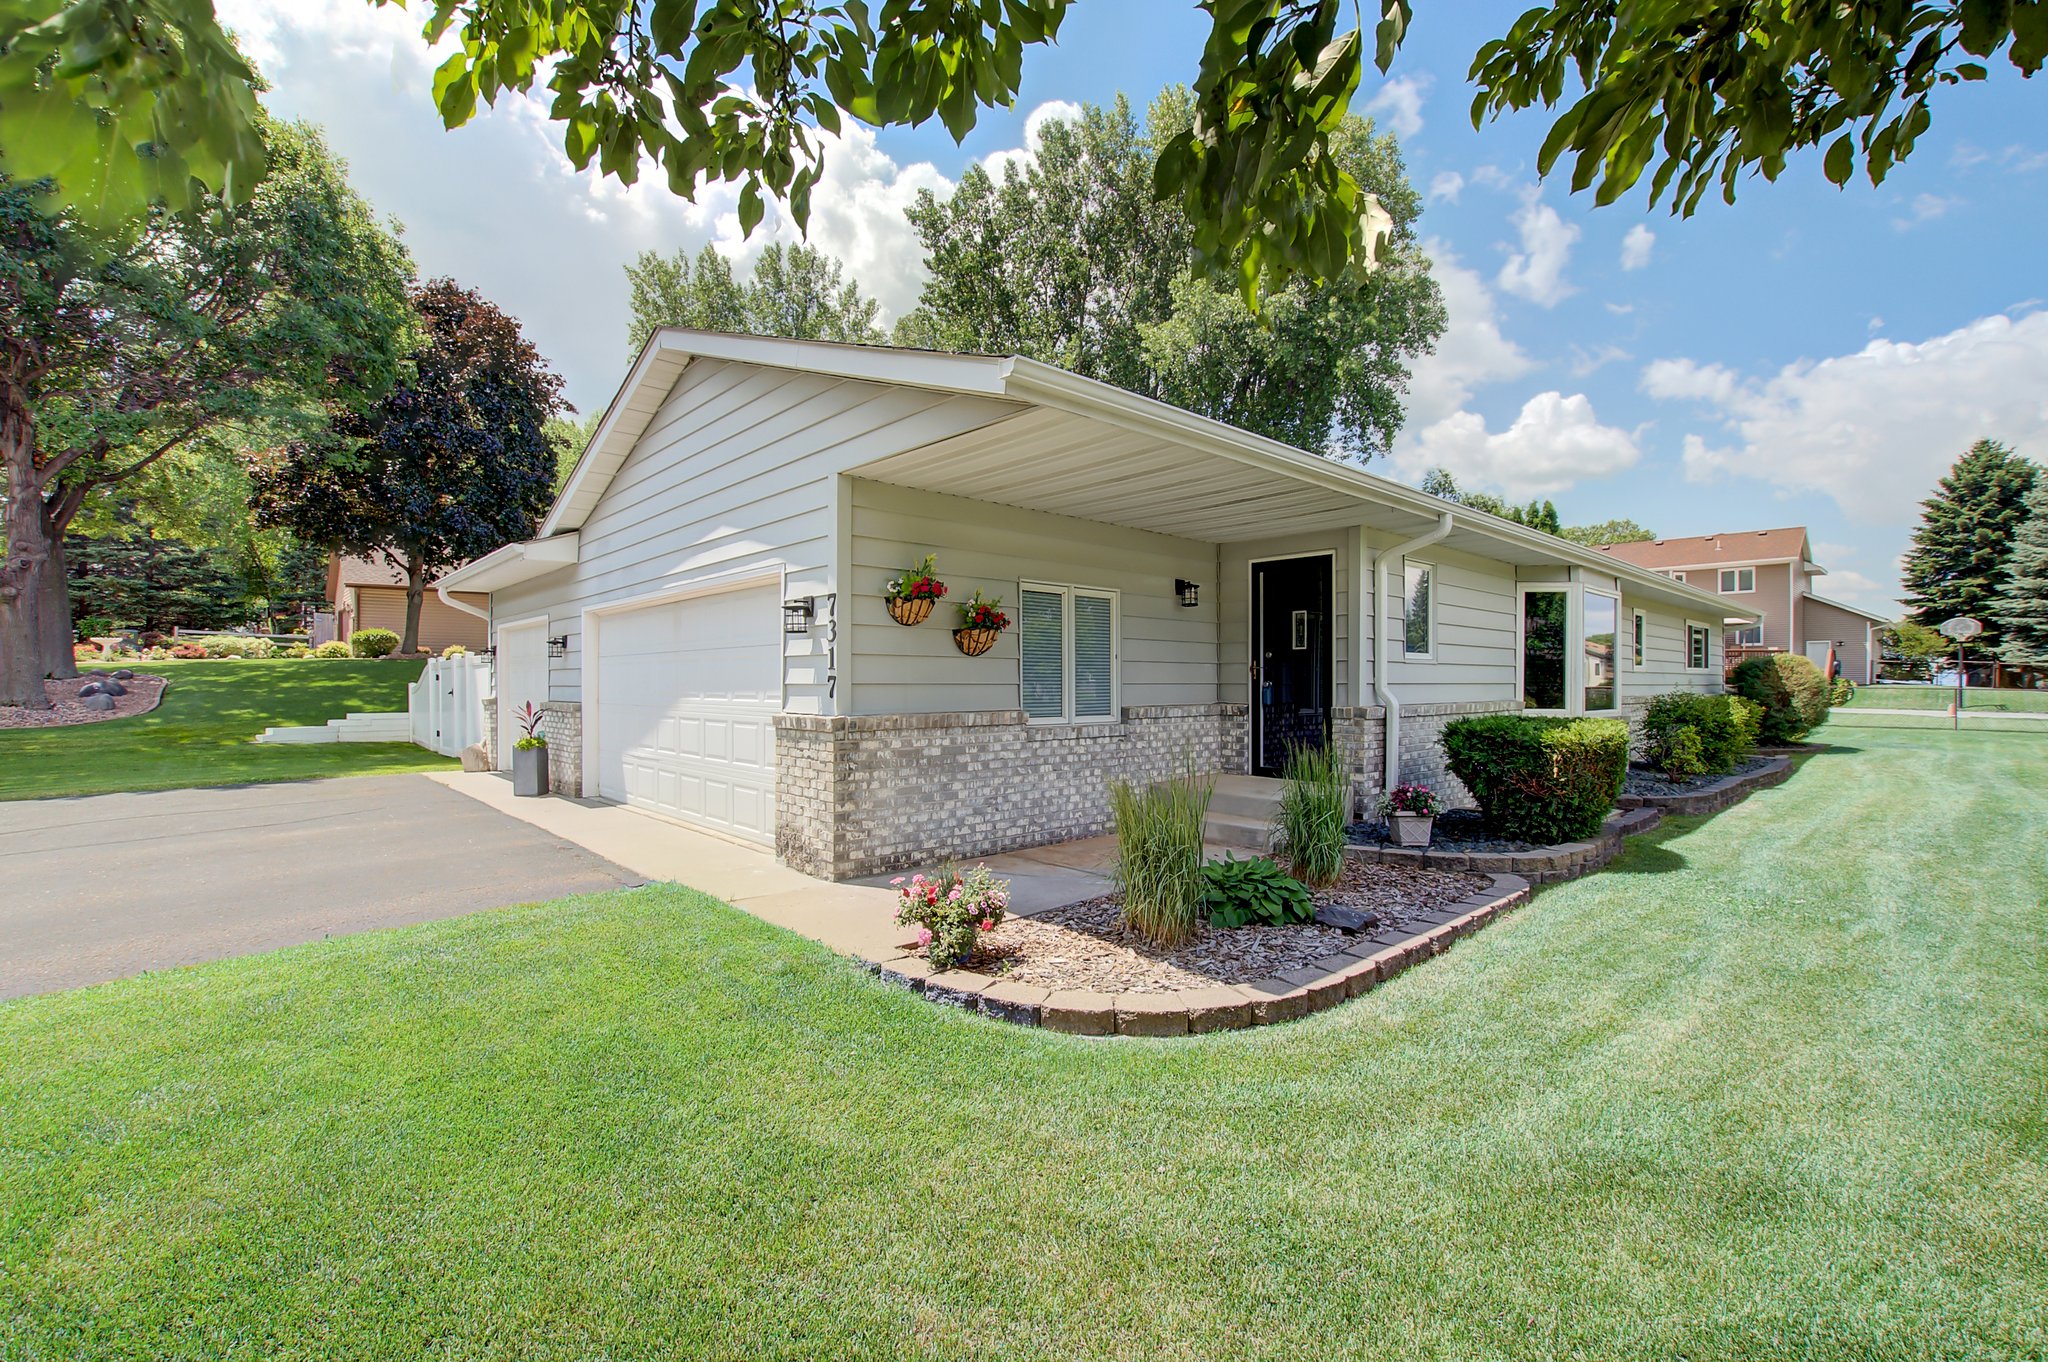  7317 Boyd Ave, Inver Grove Heights, MN 55076, US